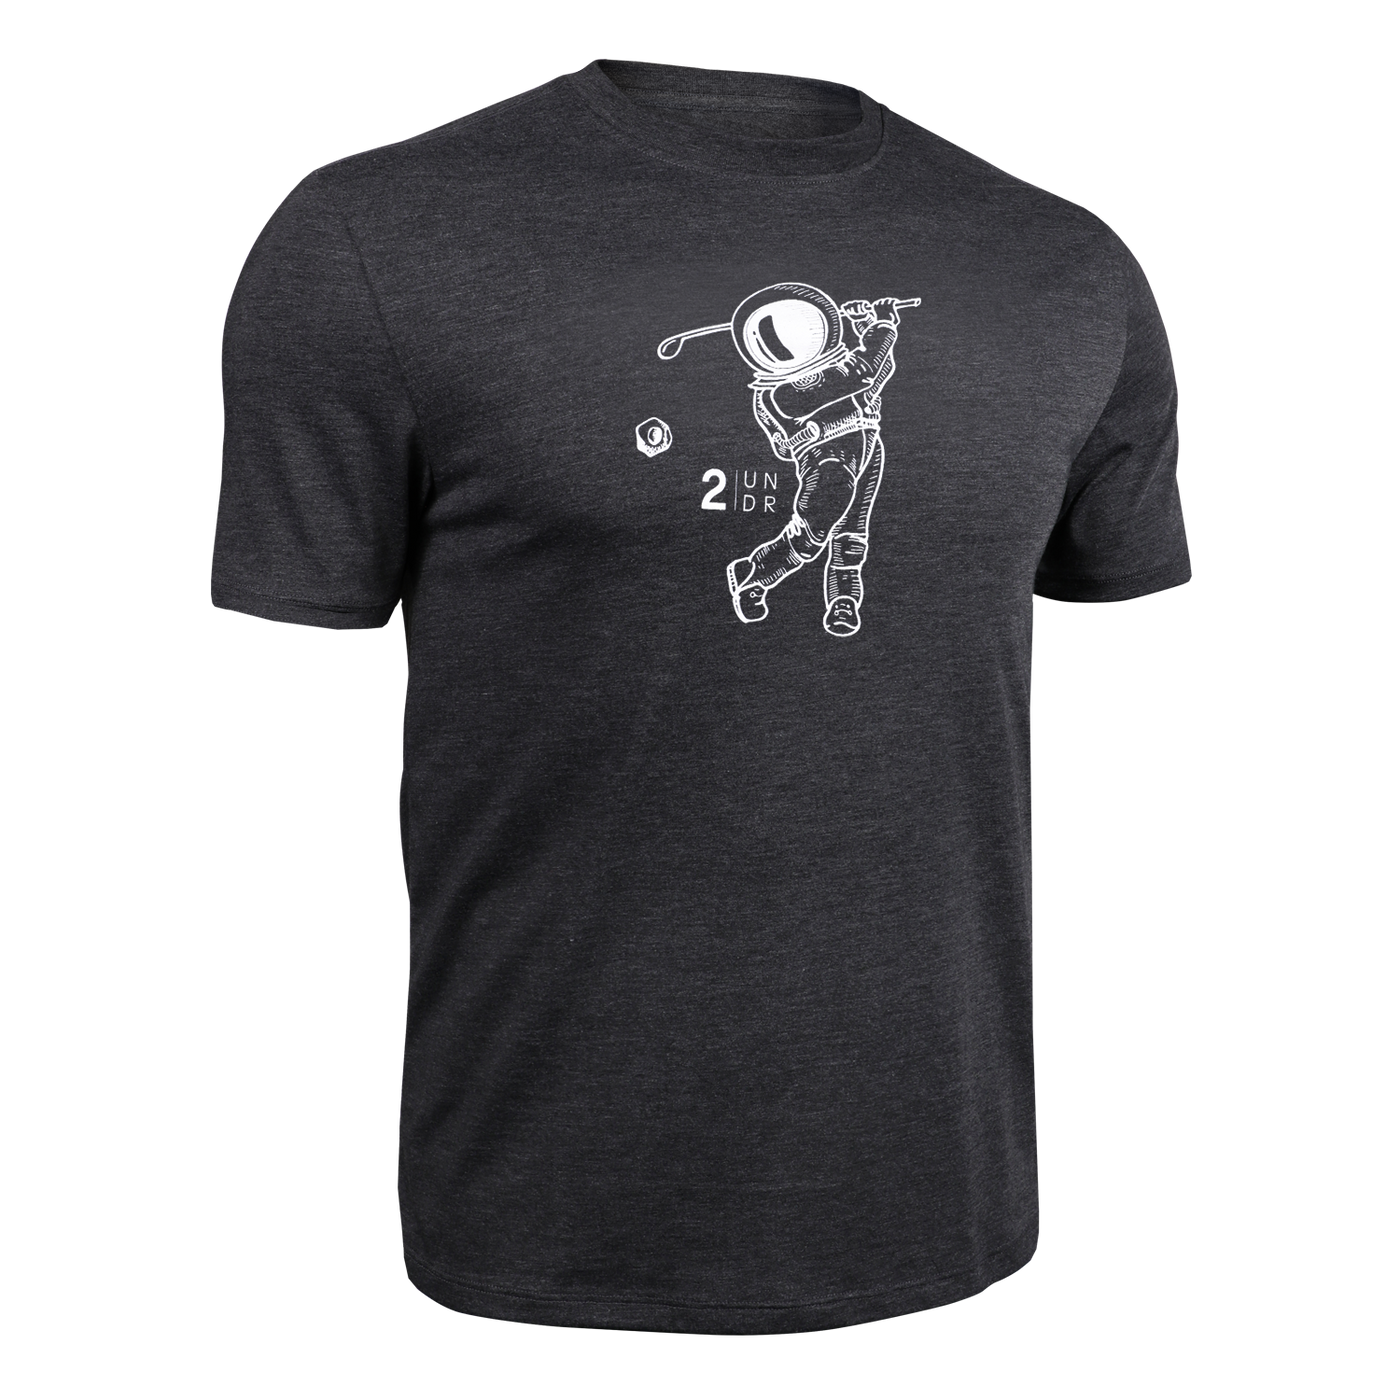 All Day Crew Tee - Space Golf Charcoal